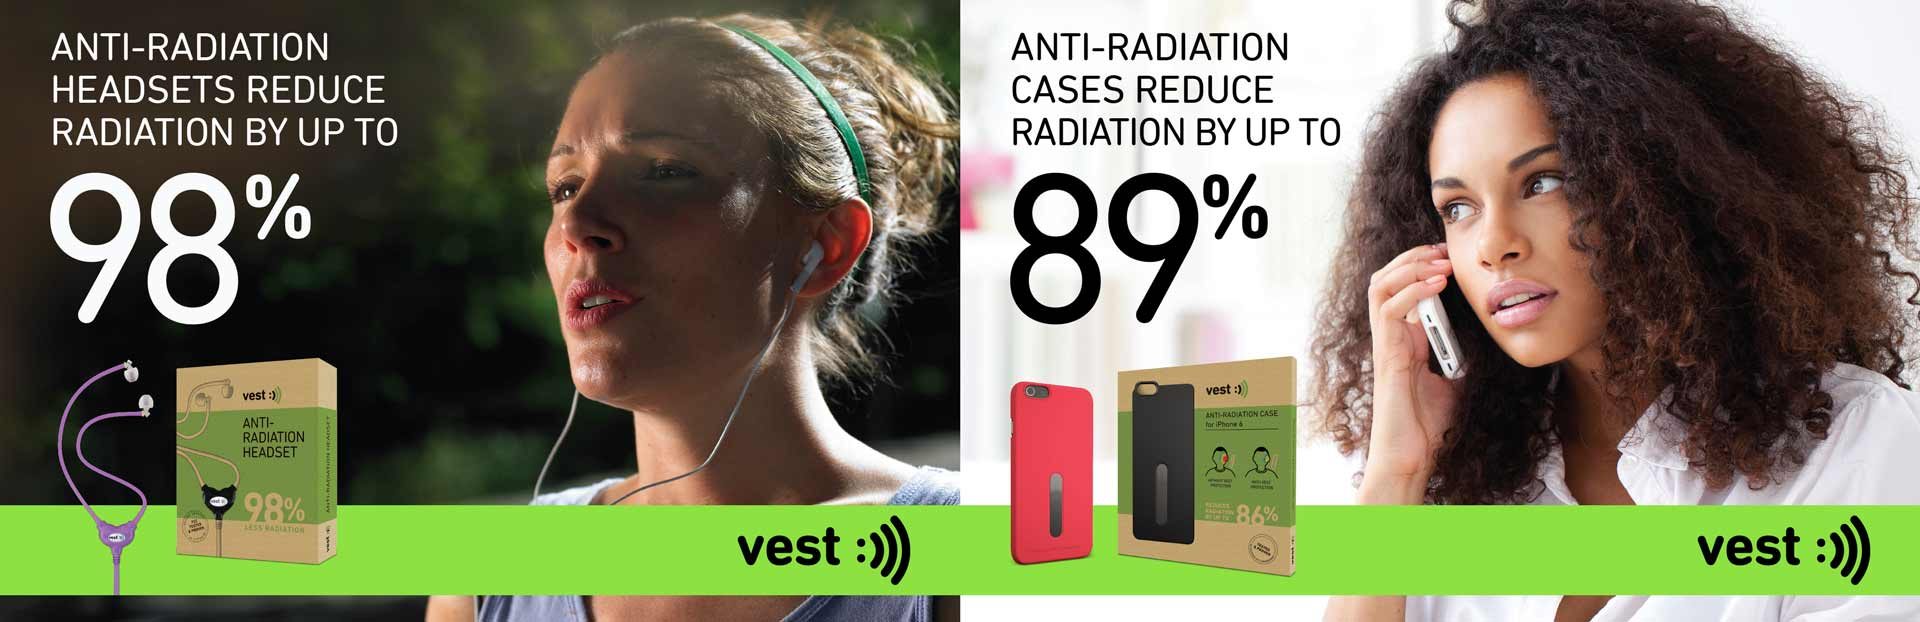 Vest Anti Radiation Headsets & Cases reduce Radiation Exposure up to 89% and 98% respectively